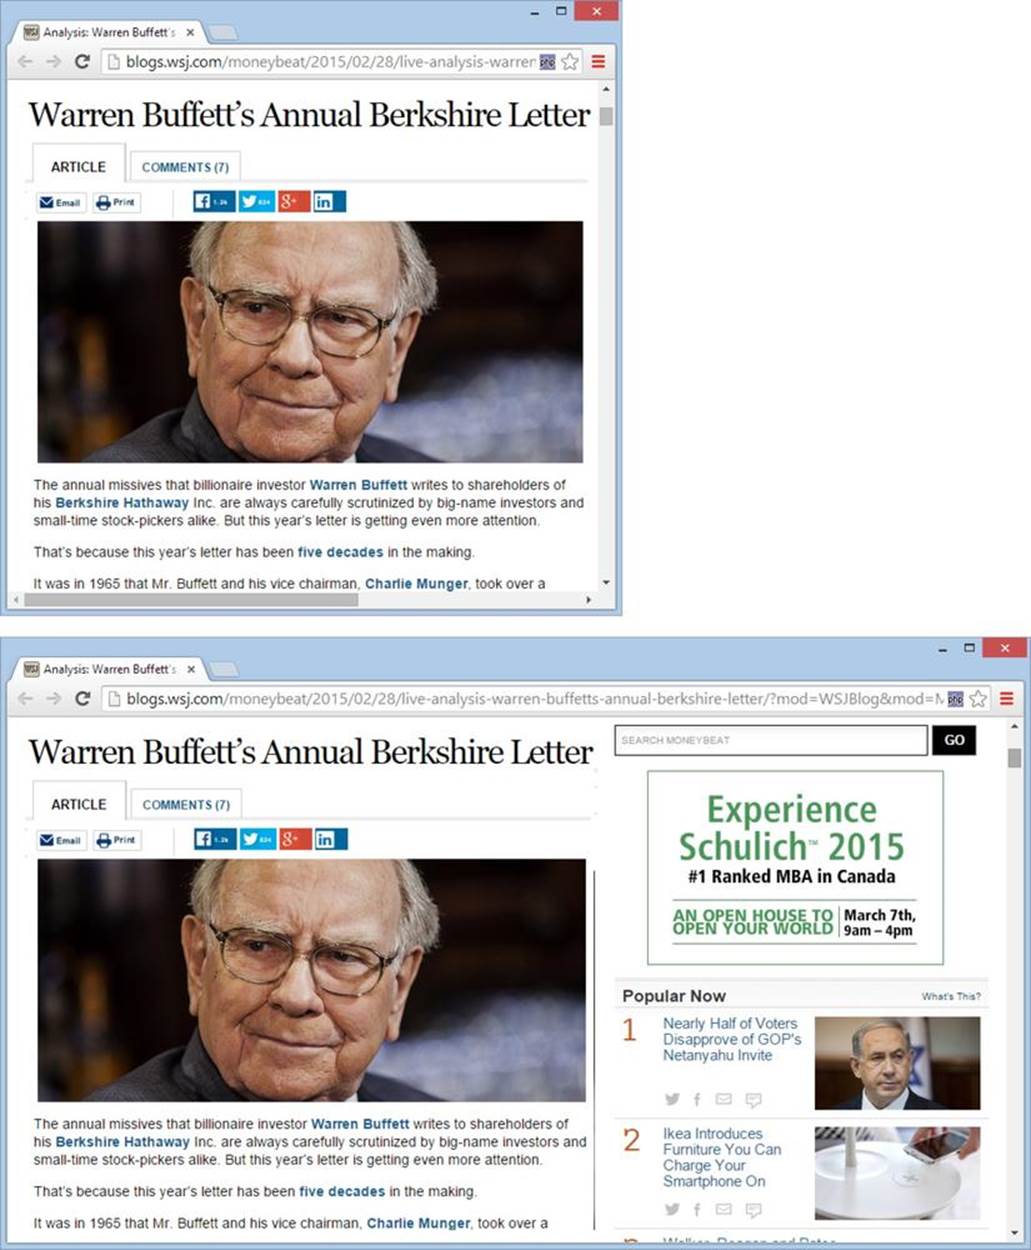 Top: To read the text of this article without scrolling side to side, you need a window that’s around 600 pixels wide. Just about every computer screen can accommodate that.Bottom: Widen the window to about 1,000 pixels and you see frills like videos, ads, a search box, and a list of popular articles. If you make the window any wider, all you’ll get is extra blank space